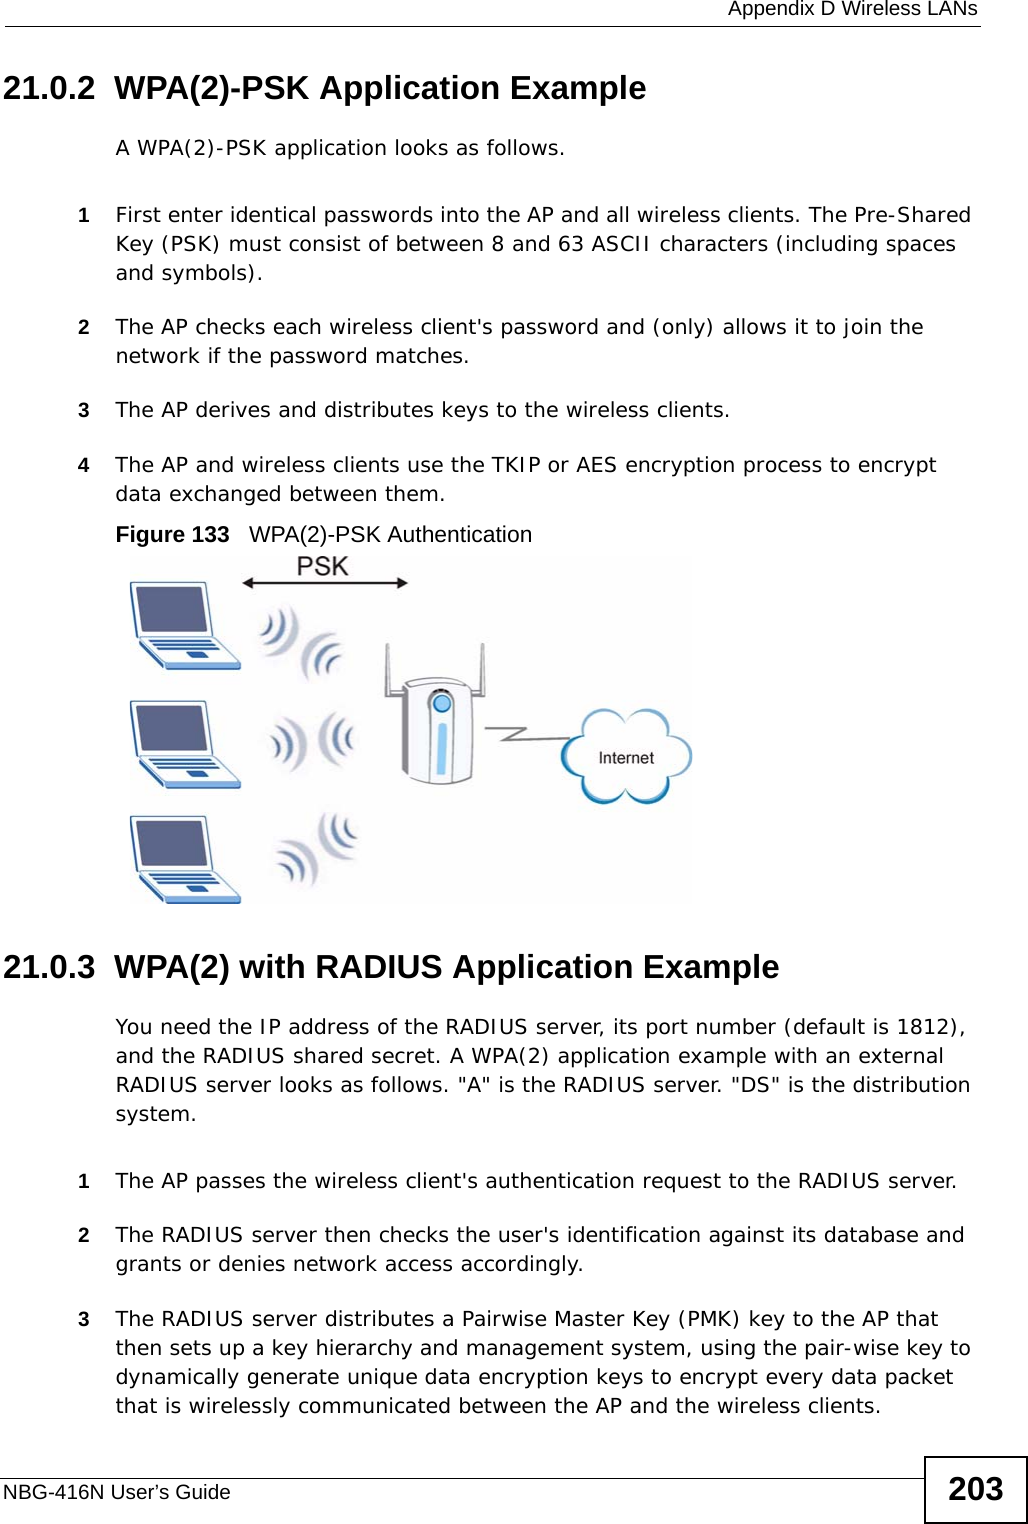  Appendix D Wireless LANsNBG-416N User’s Guide 20321.0.2  WPA(2)-PSK Application ExampleA WPA(2)-PSK application looks as follows.1First enter identical passwords into the AP and all wireless clients. The Pre-Shared Key (PSK) must consist of between 8 and 63 ASCII characters (including spaces and symbols).2The AP checks each wireless client&apos;s password and (only) allows it to join the network if the password matches.3The AP derives and distributes keys to the wireless clients.4The AP and wireless clients use the TKIP or AES encryption process to encrypt data exchanged between them.Figure 133   WPA(2)-PSK Authentication21.0.3  WPA(2) with RADIUS Application ExampleYou need the IP address of the RADIUS server, its port number (default is 1812), and the RADIUS shared secret. A WPA(2) application example with an external RADIUS server looks as follows. &quot;A&quot; is the RADIUS server. &quot;DS&quot; is the distribution system.1The AP passes the wireless client&apos;s authentication request to the RADIUS server.2The RADIUS server then checks the user&apos;s identification against its database and grants or denies network access accordingly.3The RADIUS server distributes a Pairwise Master Key (PMK) key to the AP that then sets up a key hierarchy and management system, using the pair-wise key to dynamically generate unique data encryption keys to encrypt every data packet that is wirelessly communicated between the AP and the wireless clients. 